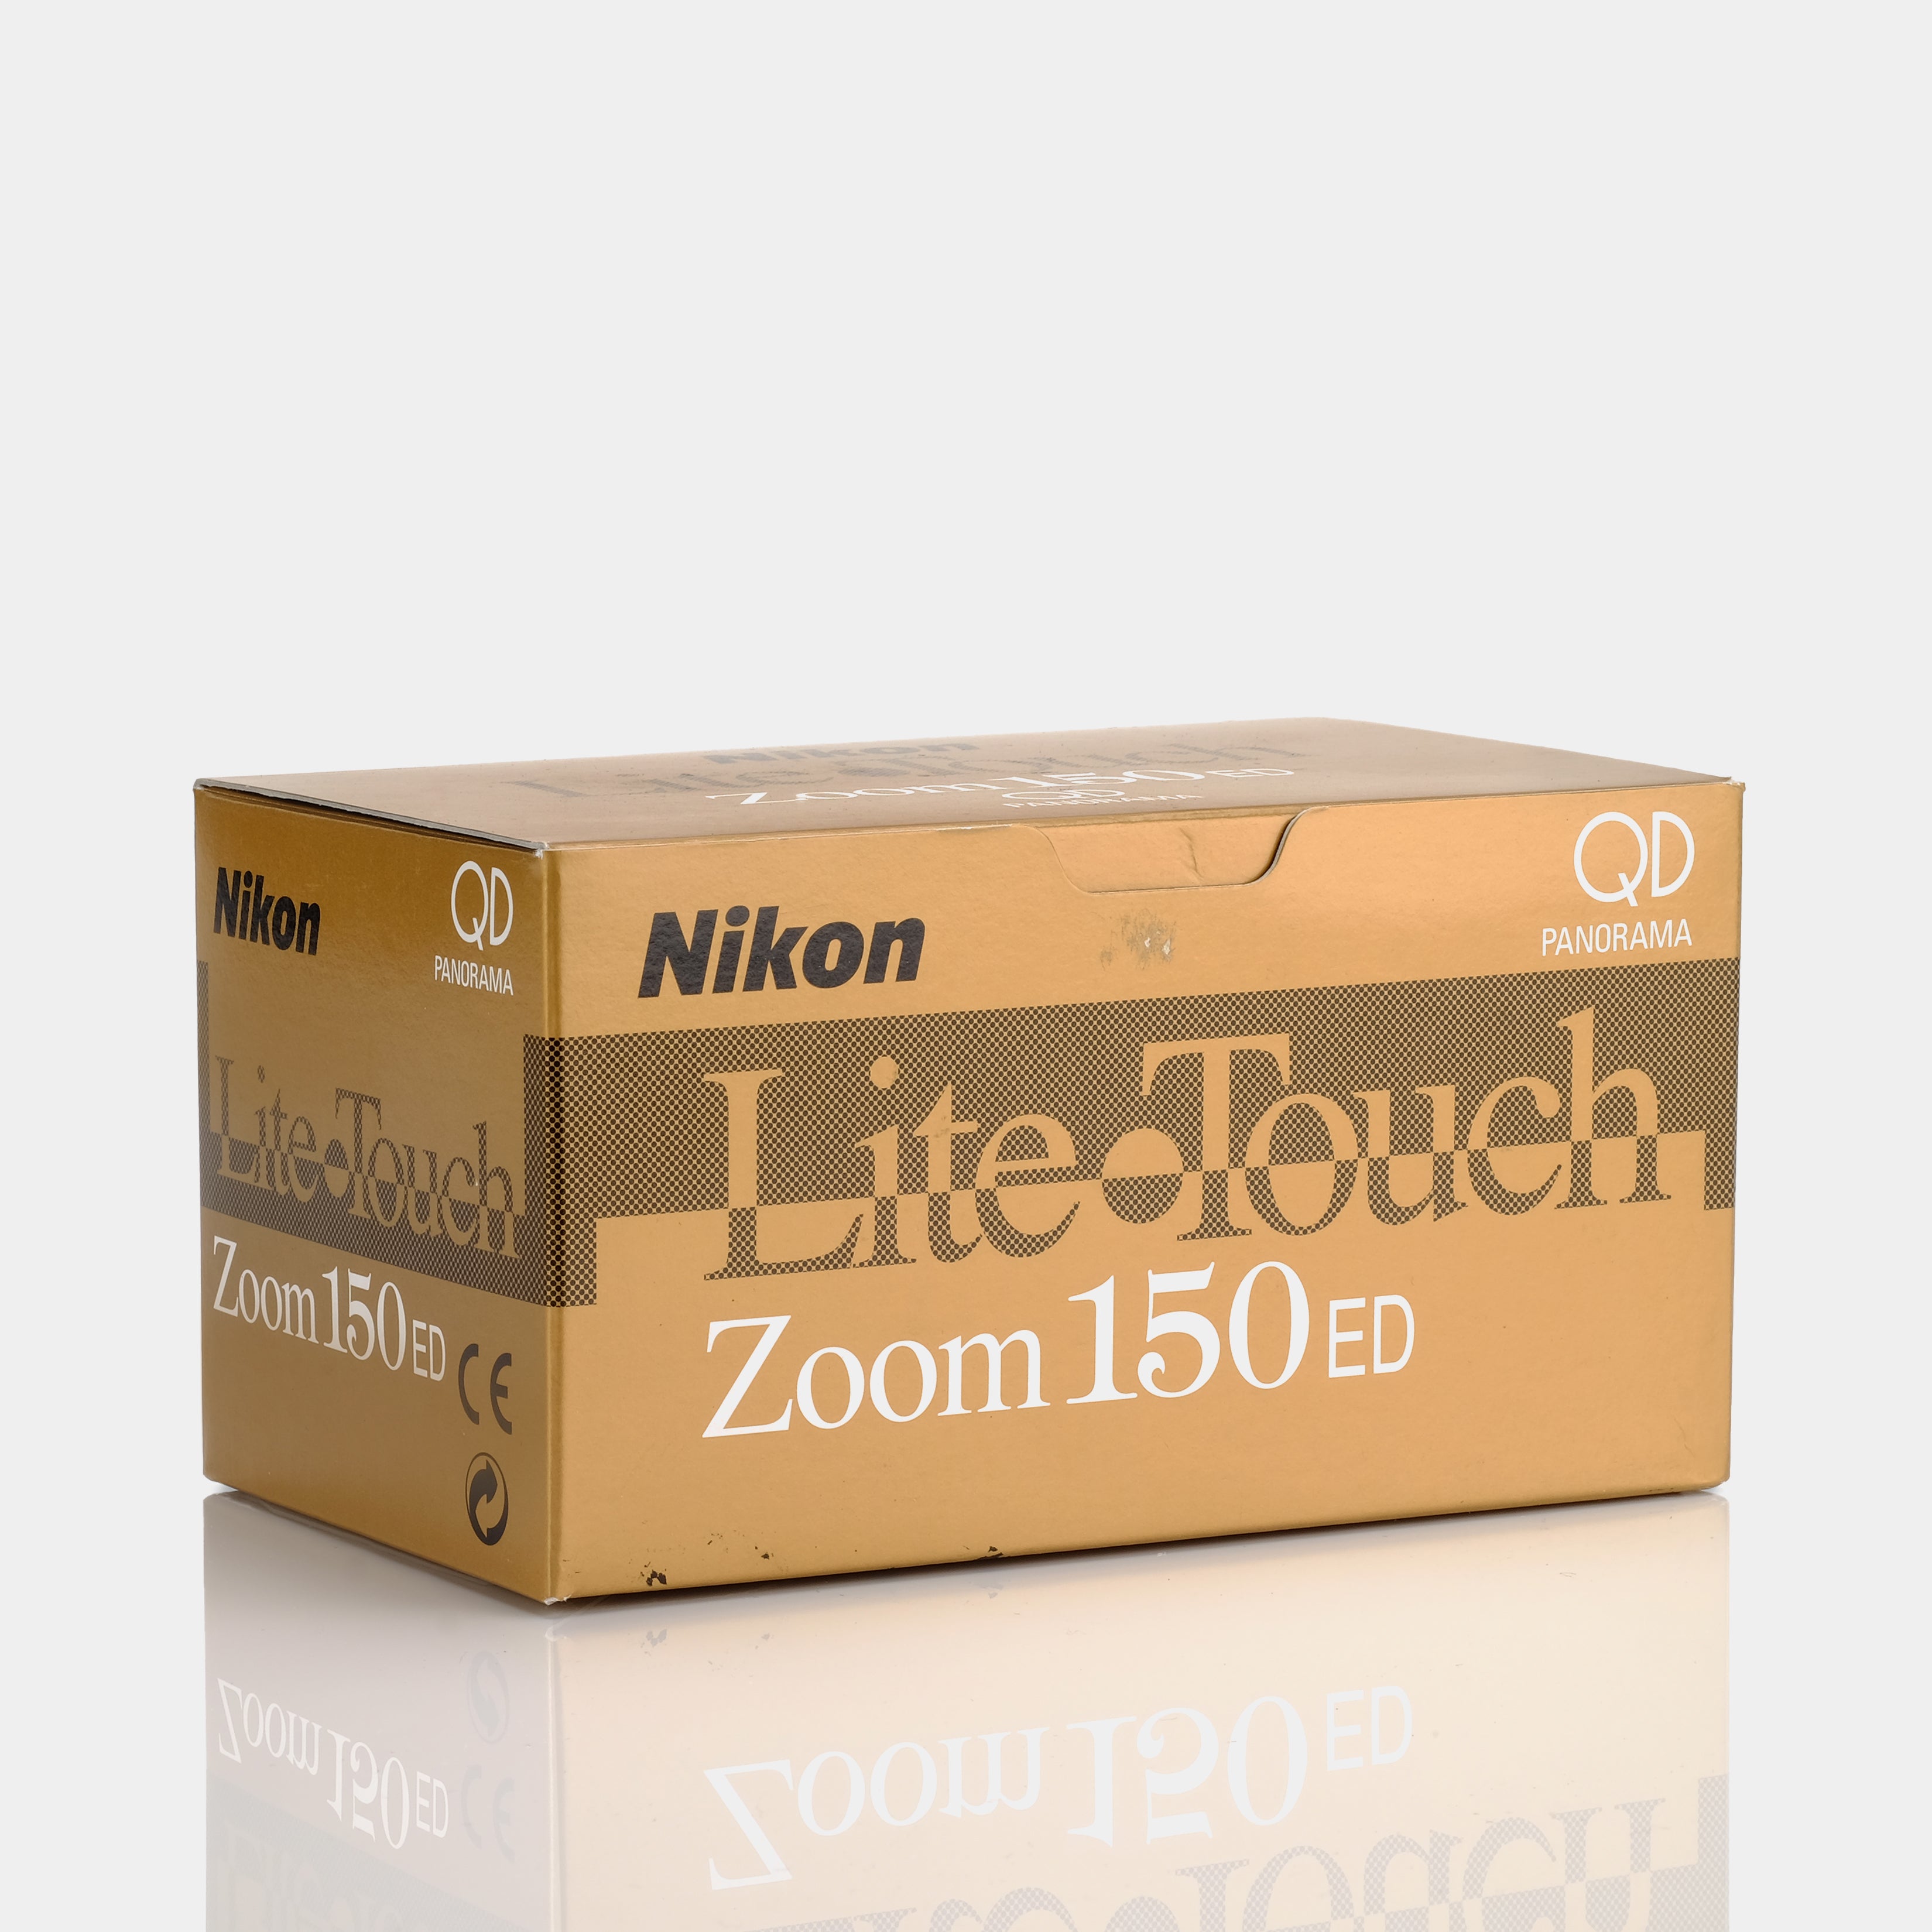 Nikon Lite-Touch Zoom 150 ED 35mm Point And Shoot Film Camera (New Old Stock)